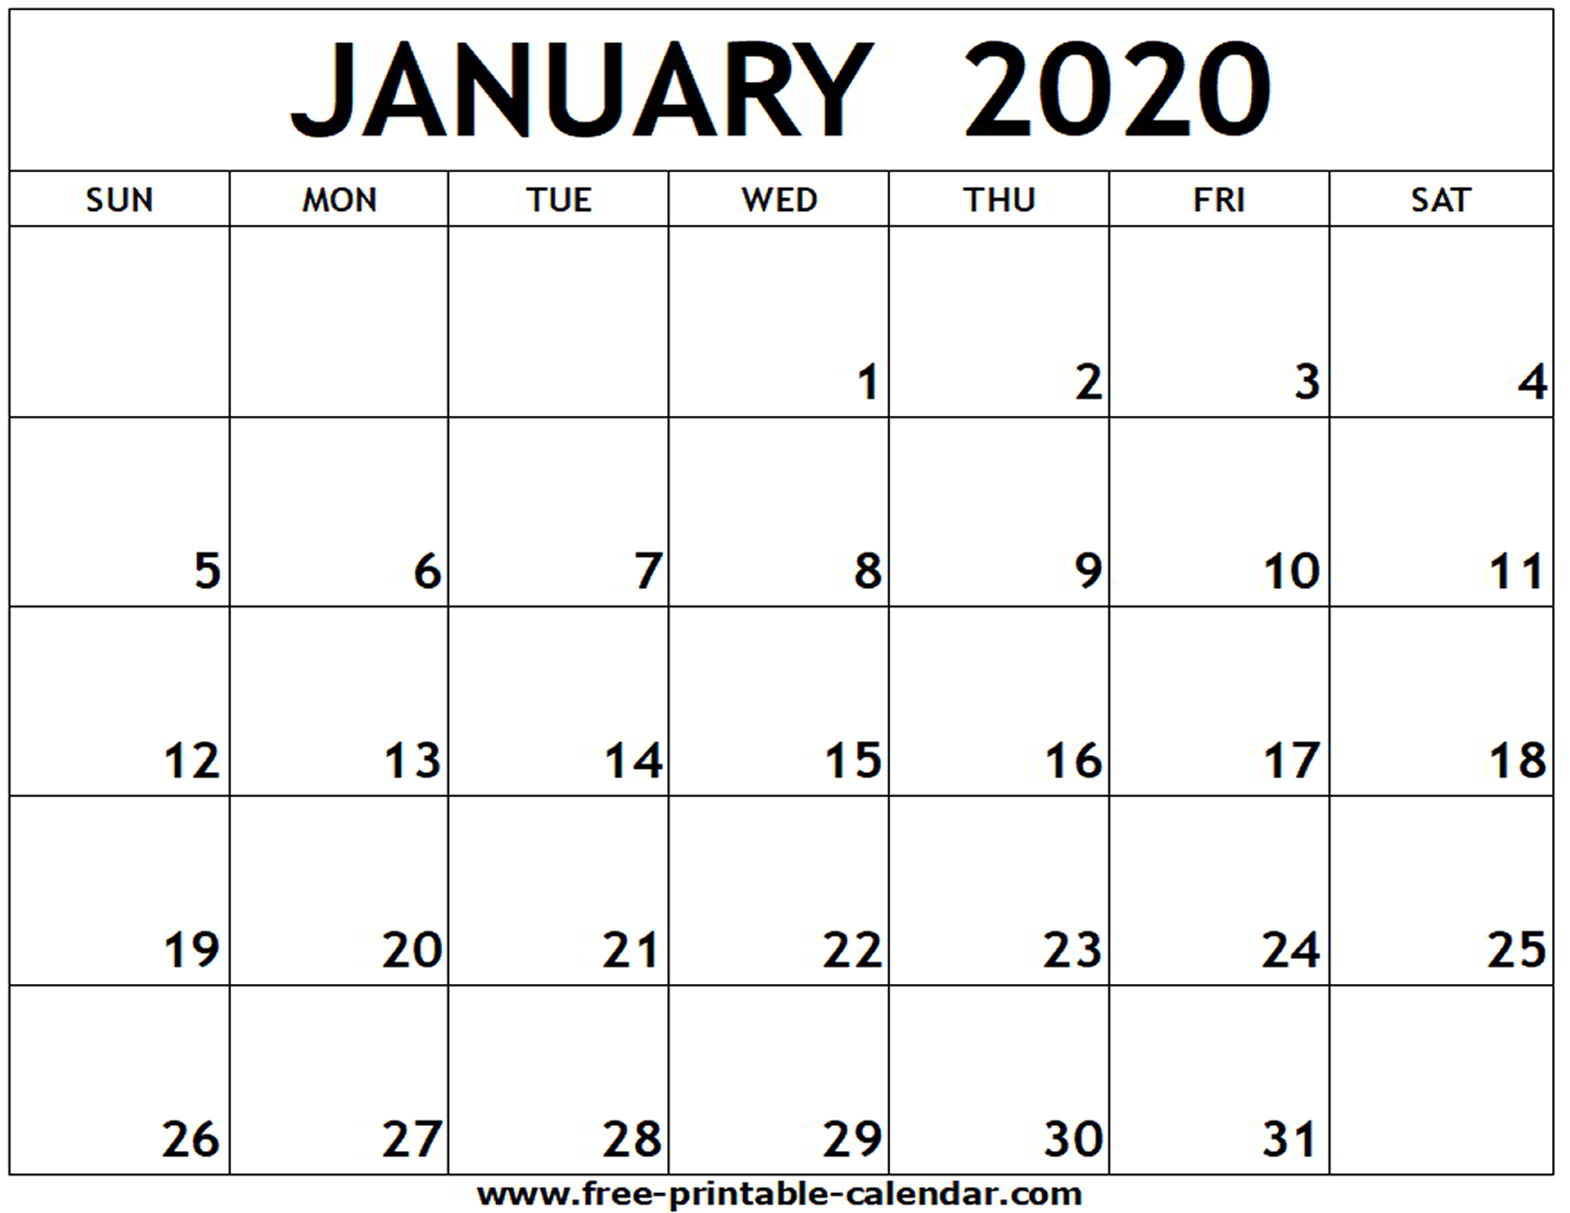 January Monthly Calendar 2020  Bolan.horizonconsulting.co with Monthly Calendar 2020 Printable